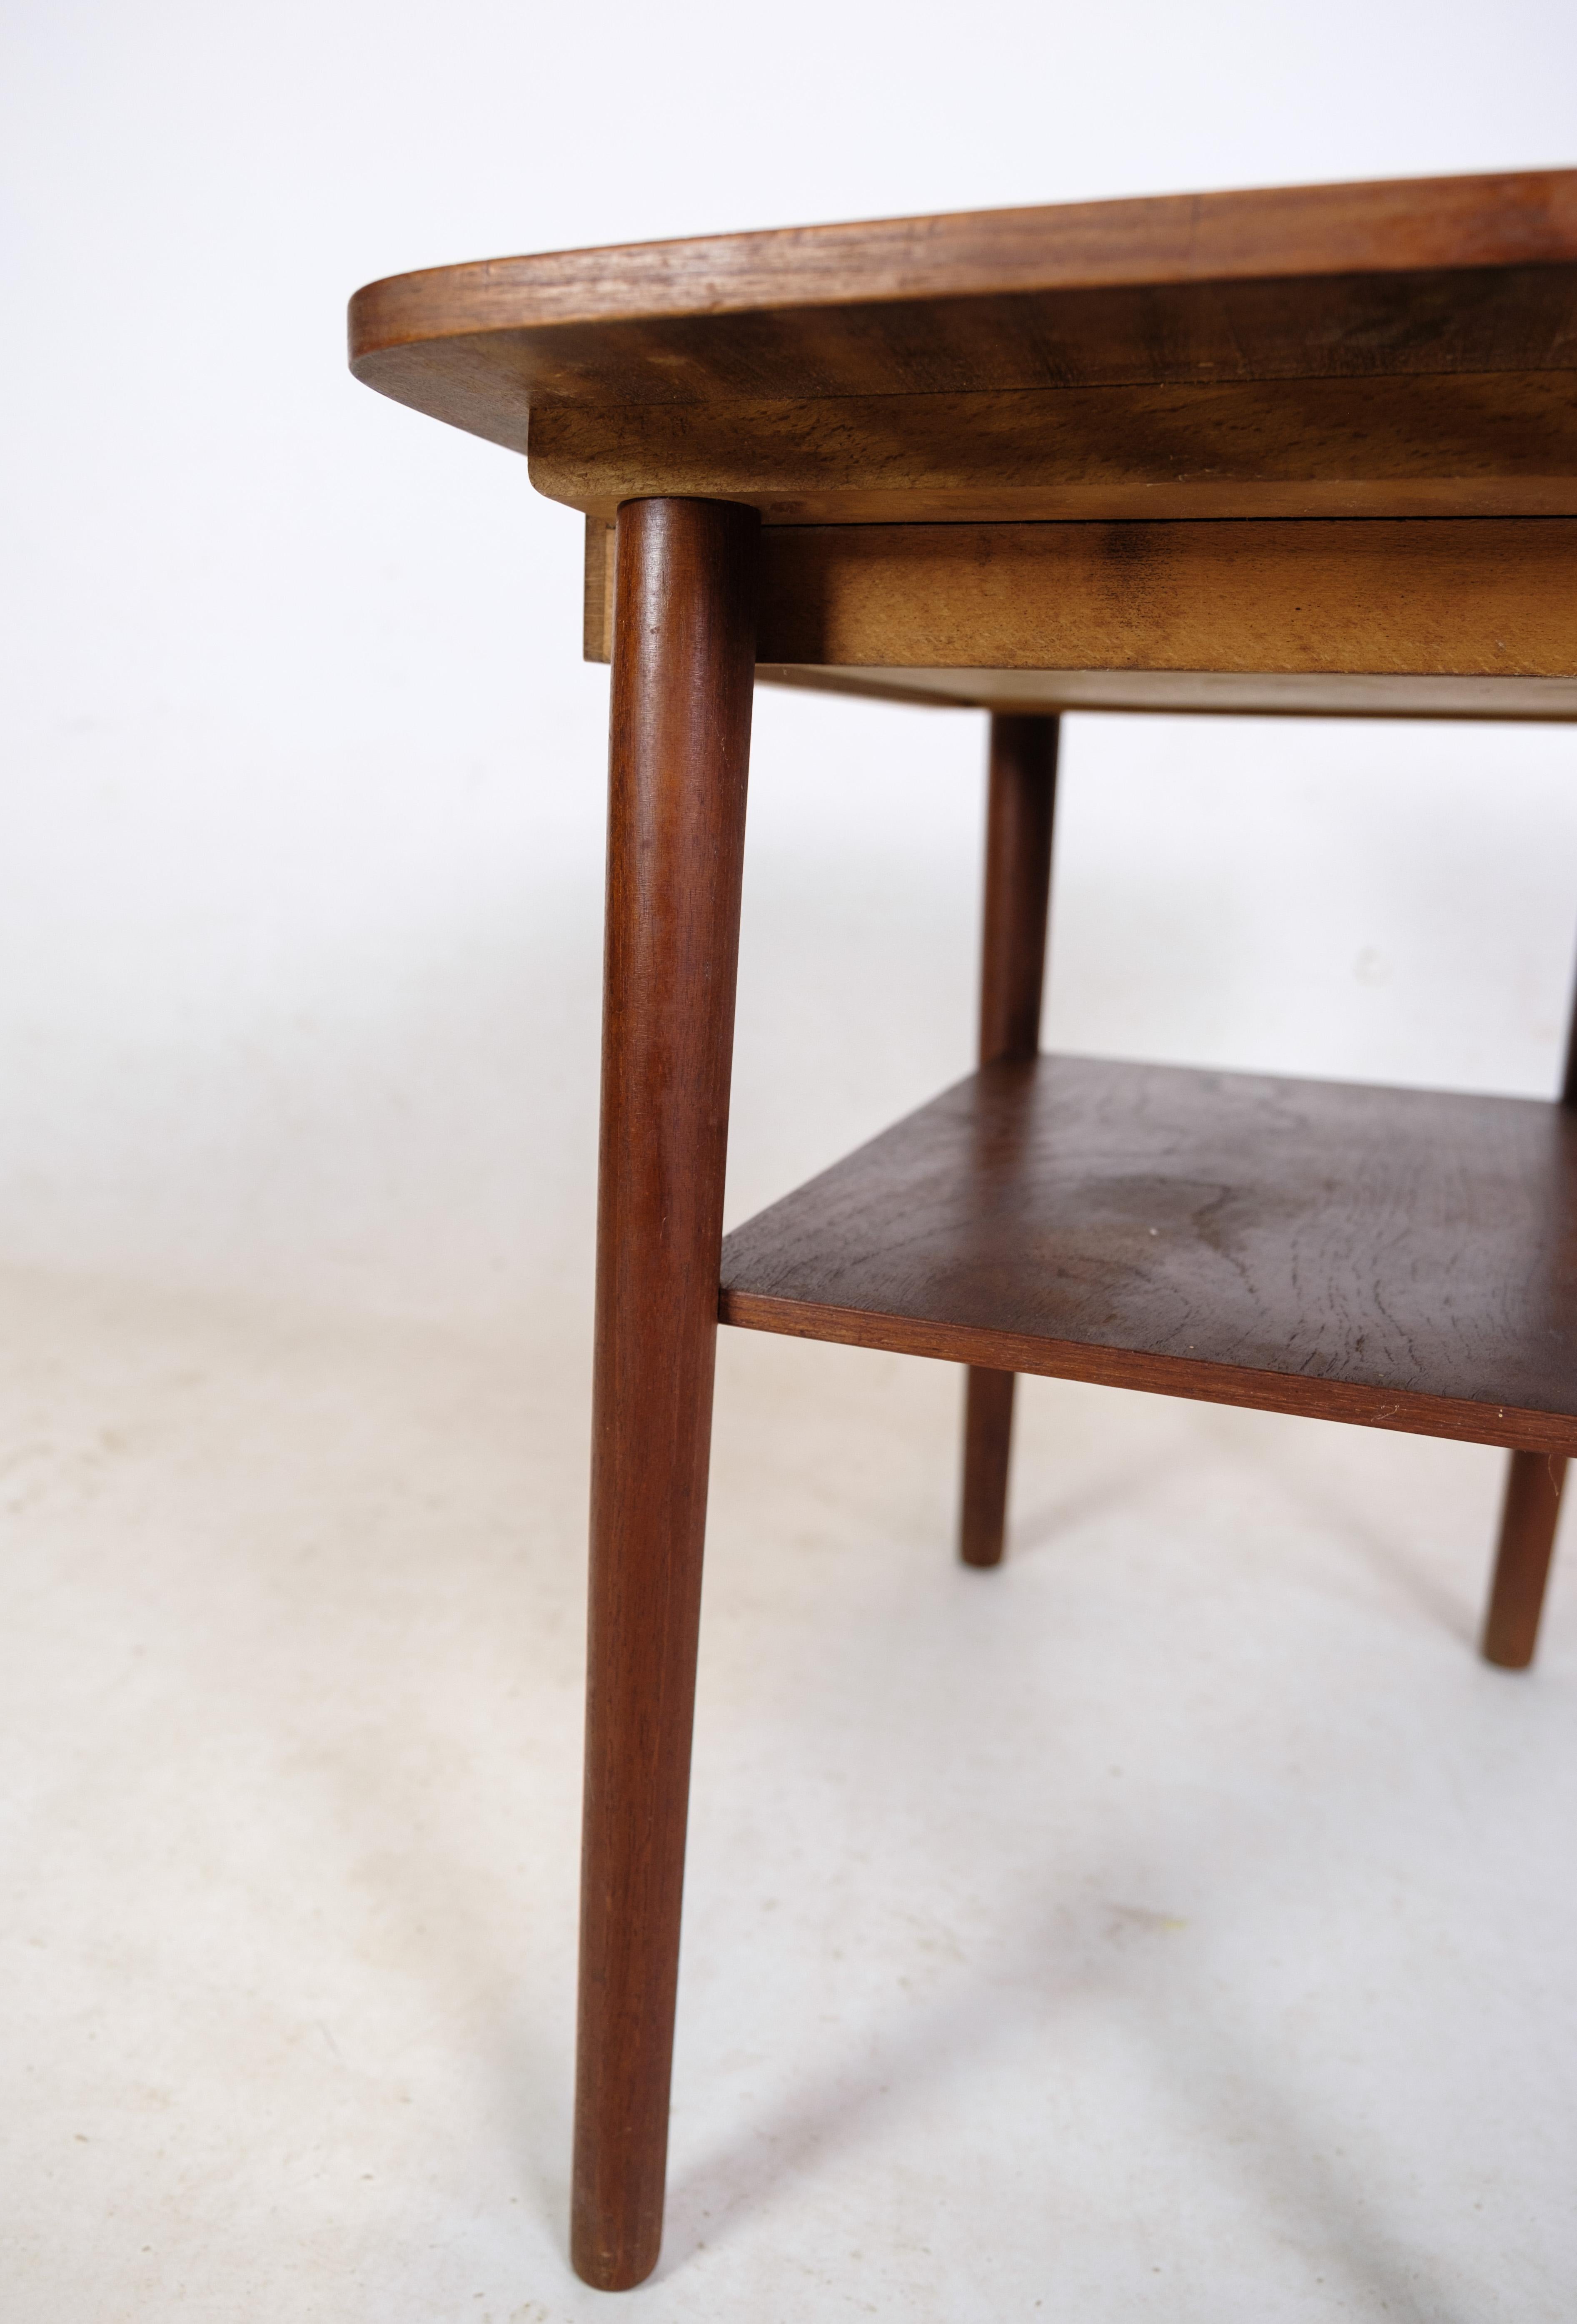 Side Table with Drawer and Shelf in Teak Wood of Danish Design from 1960's For Sale 2